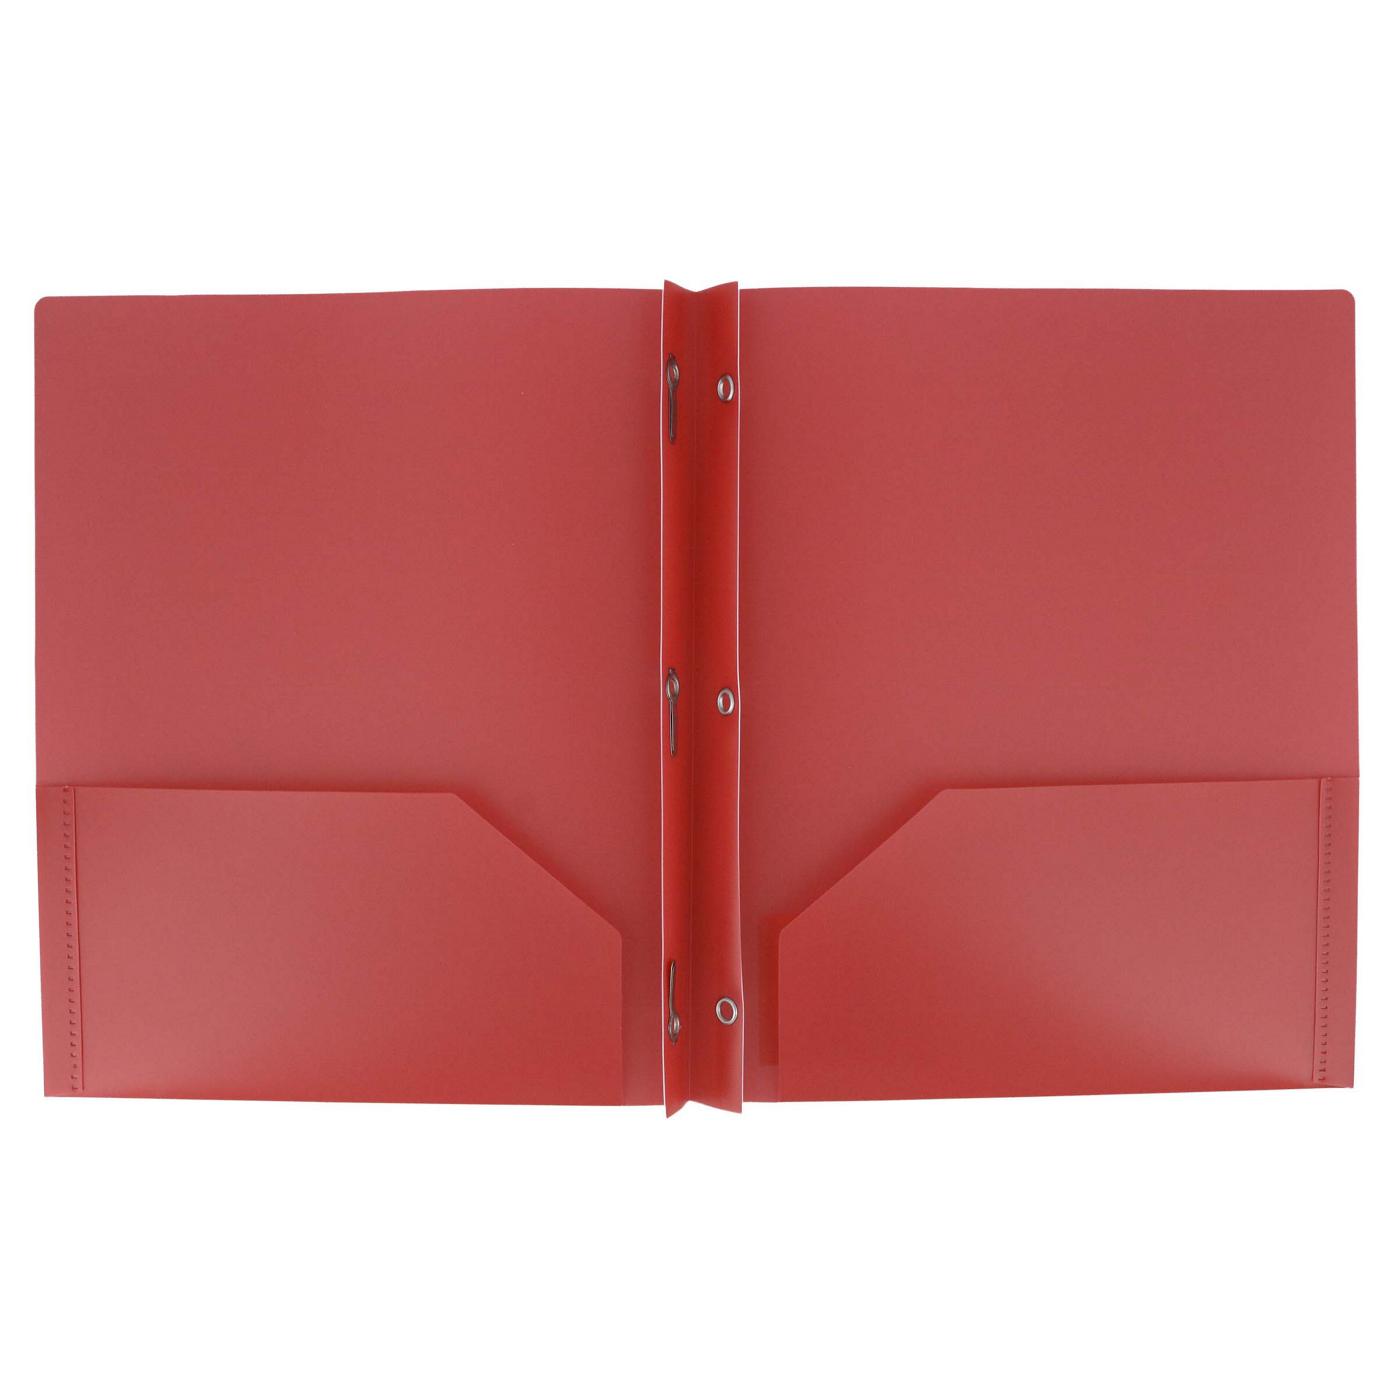 H-E-B Pocket Poly Folder with Prongs - Red; image 2 of 2